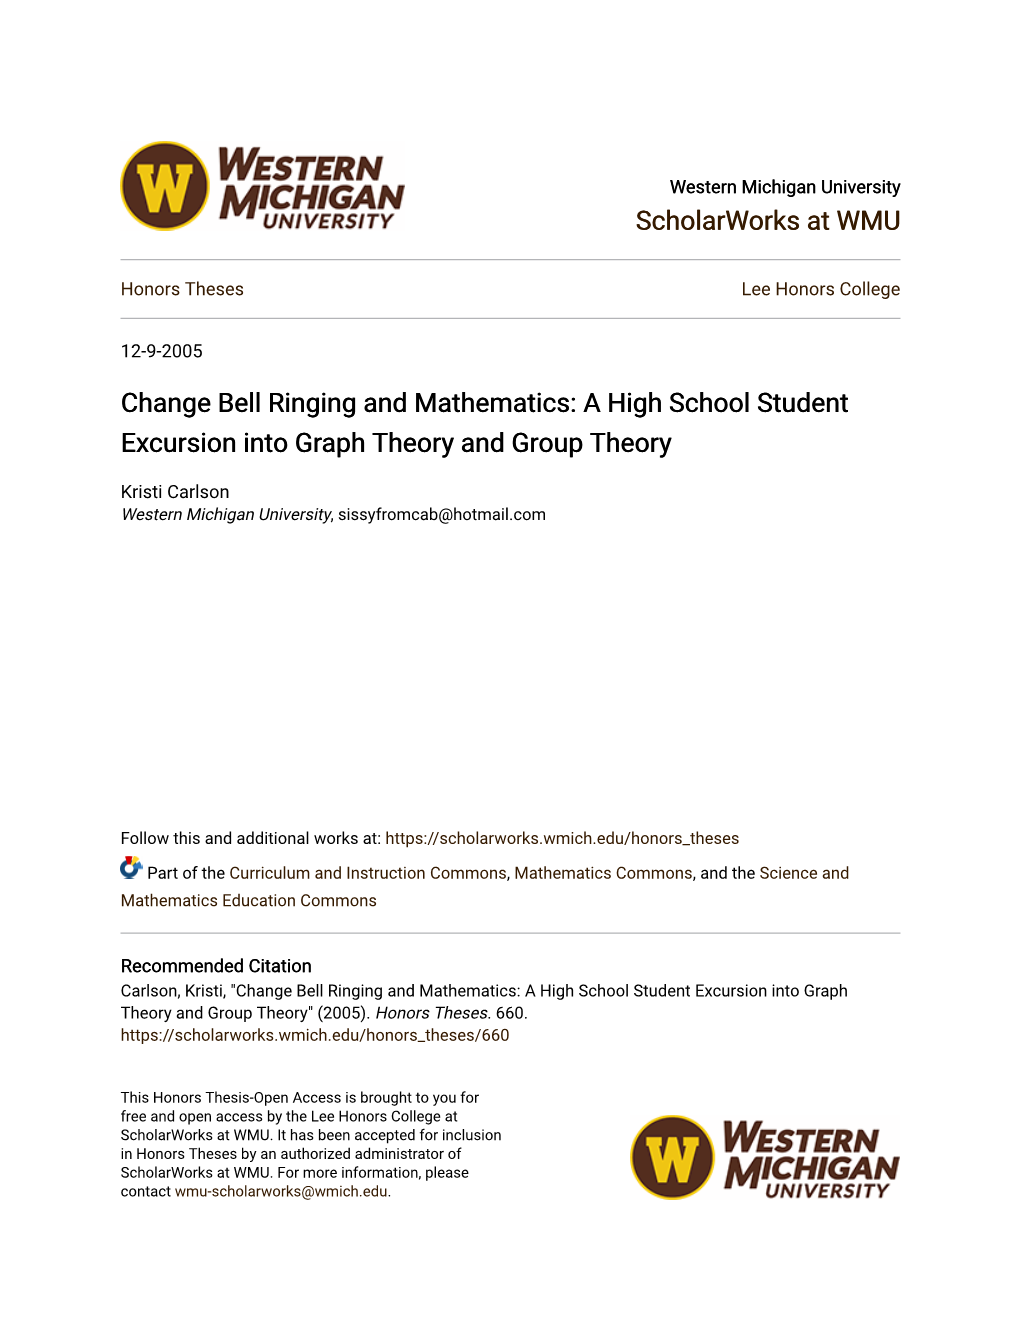 Change Bell Ringing and Mathematics: a High School Student Excursion Into Graph Theory and Group Theory